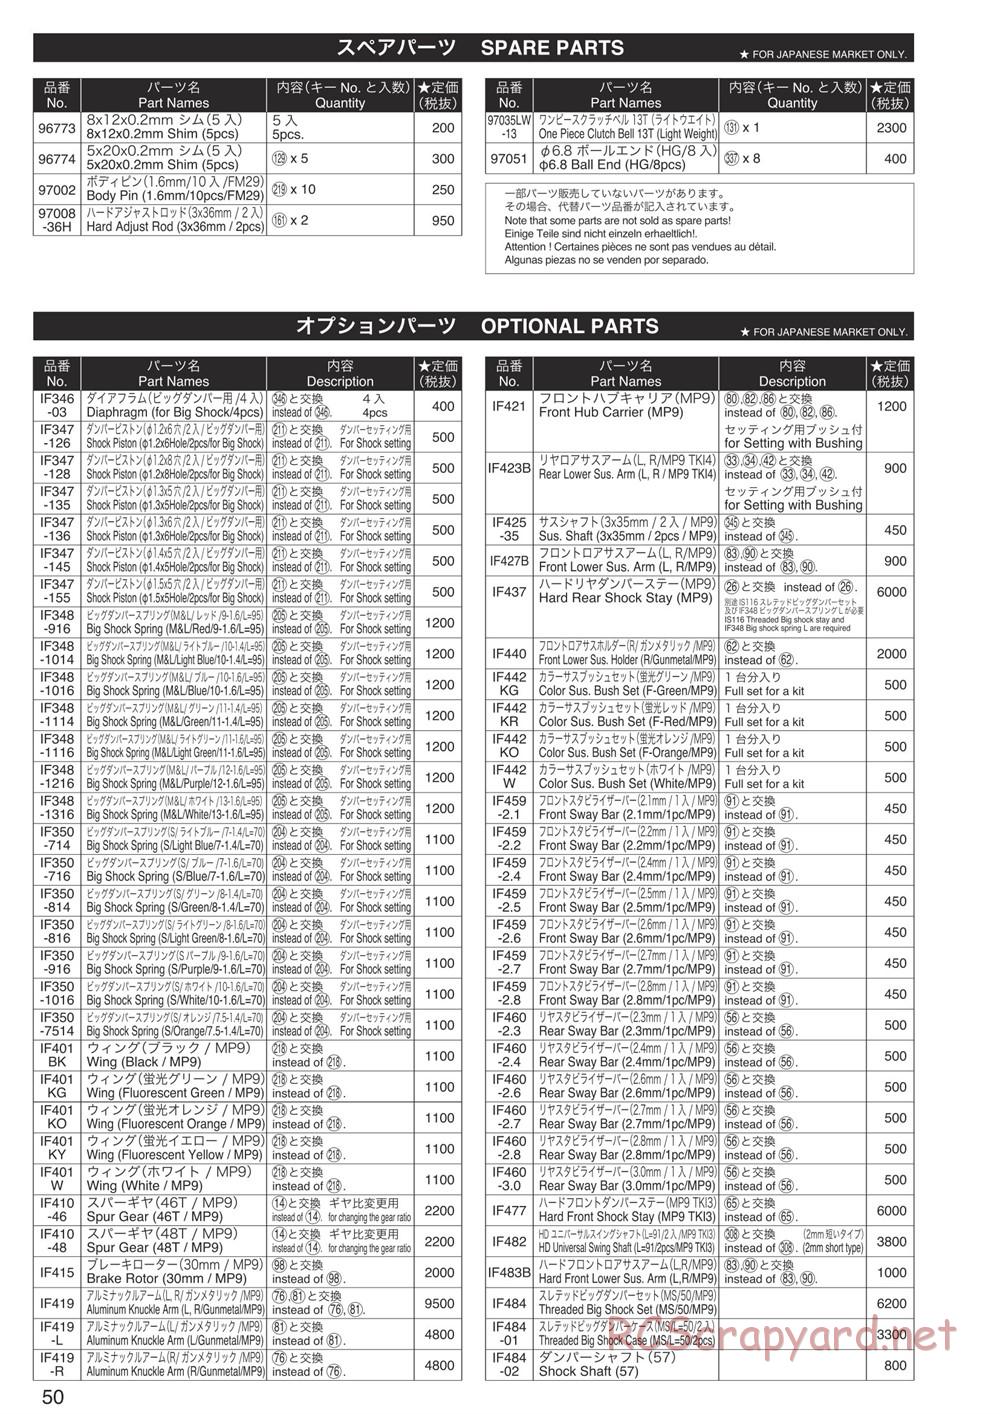 Kyosho - Inferno MP9 TKI4 10th Anniversary Special Edition - Manual - Page 49